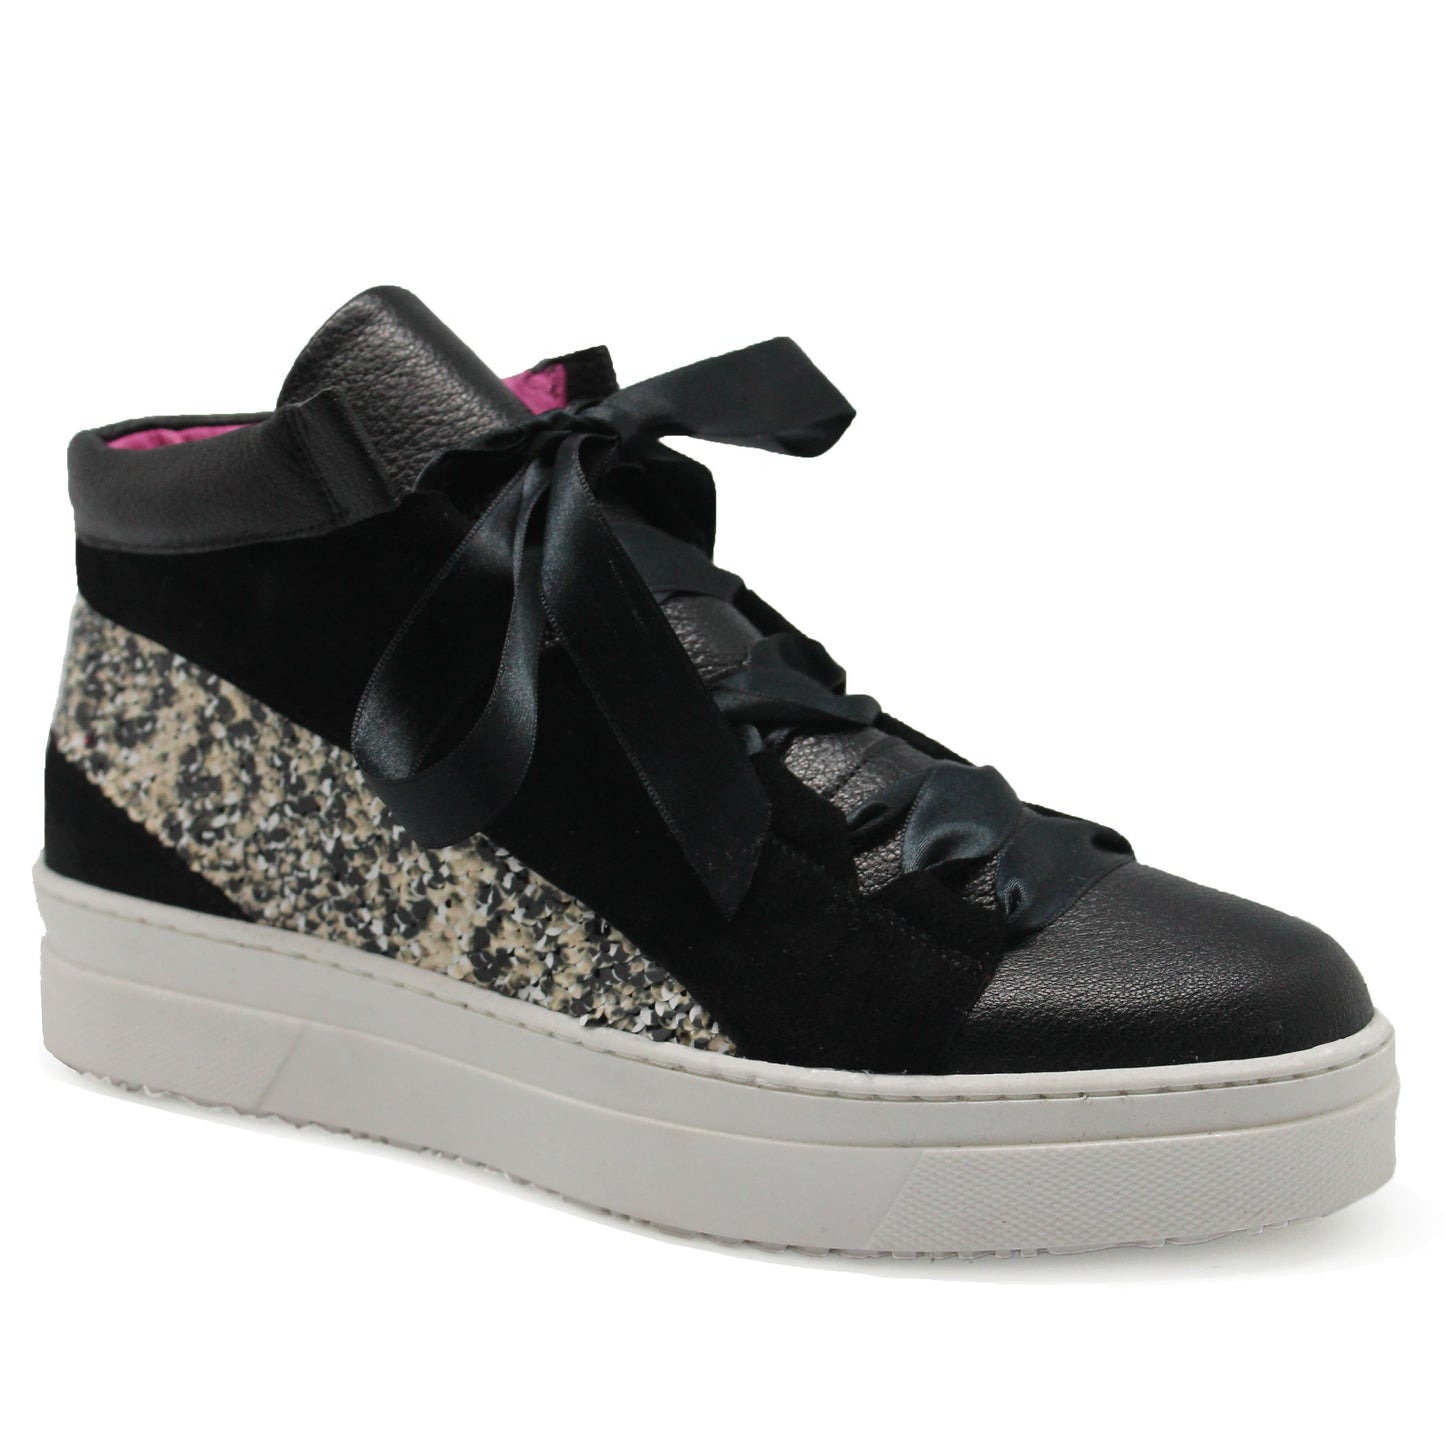 Patin - Black/White Sequin high top sneaker-LAST PAIRS 36& 39!